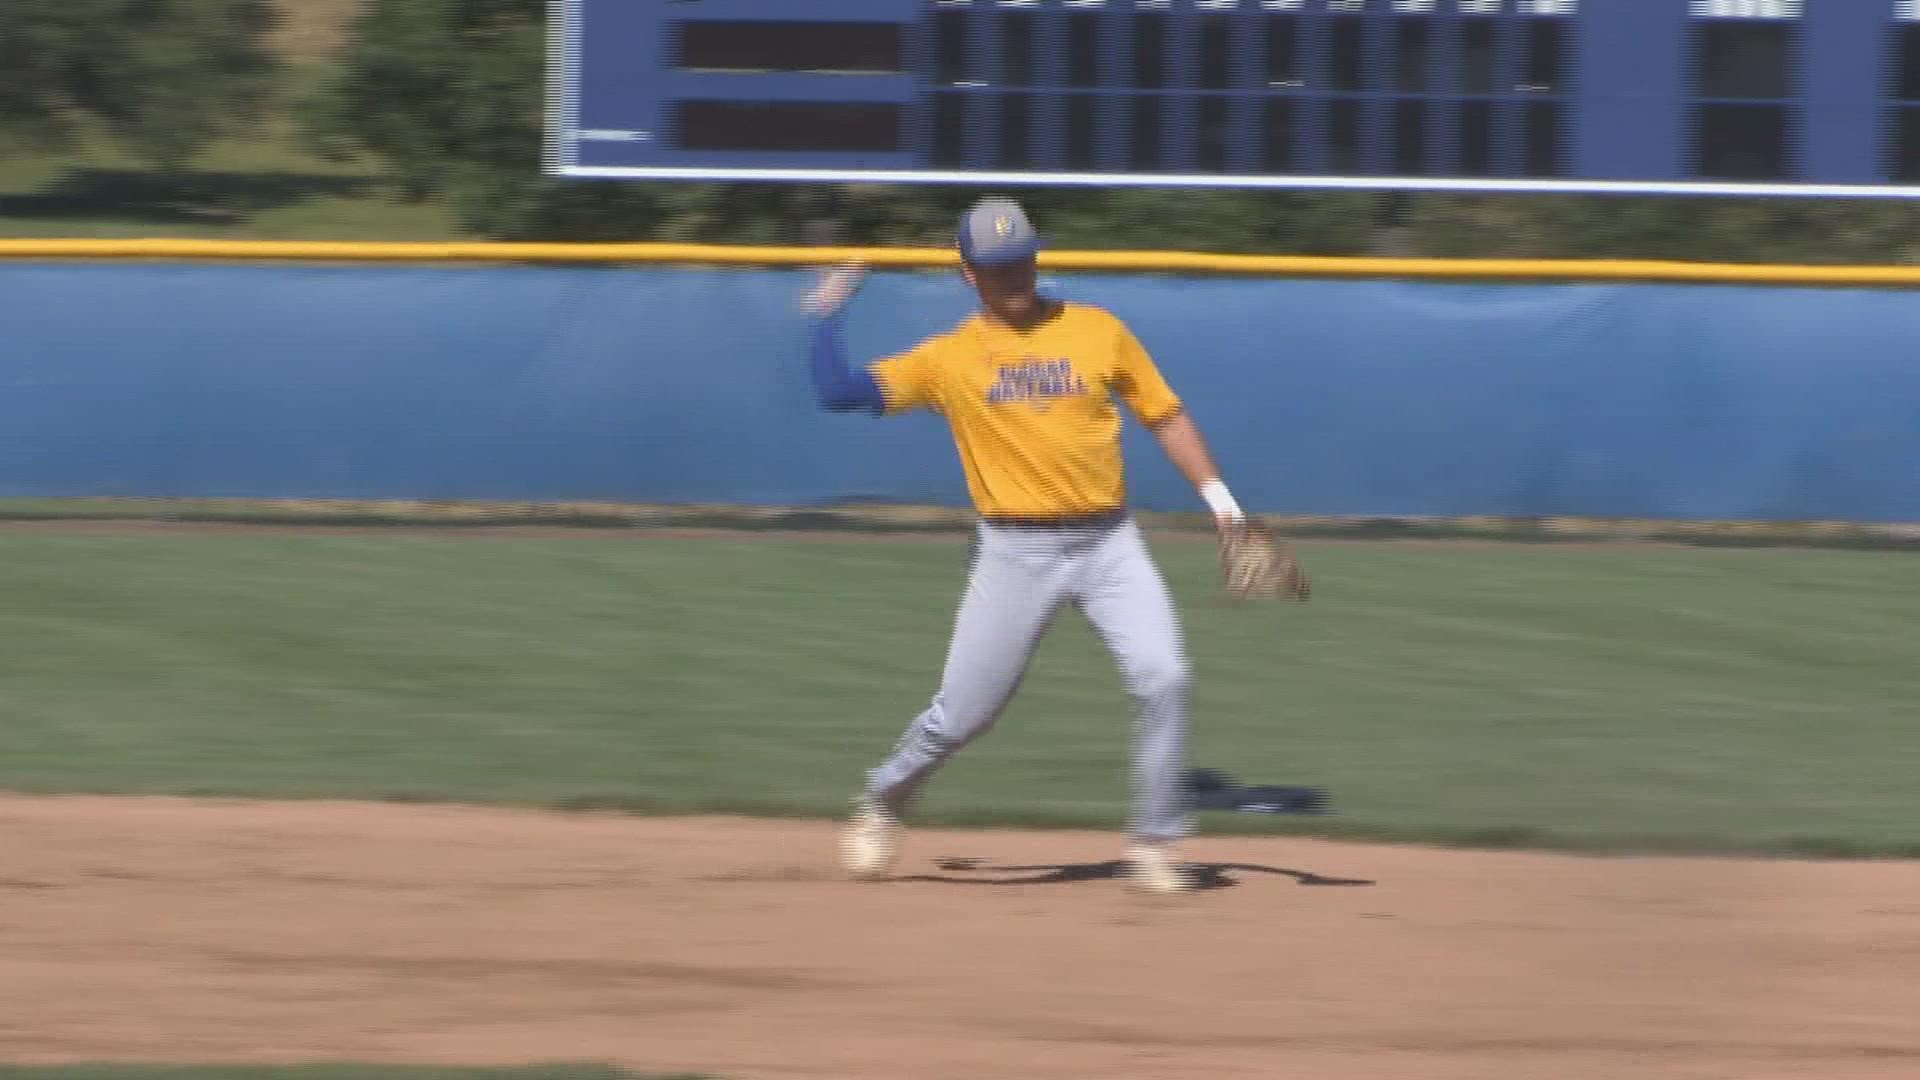 Coltin Quagliano is making an impact on the baseball field at the next level. See what the high school standout is doing at Illinois Community College.